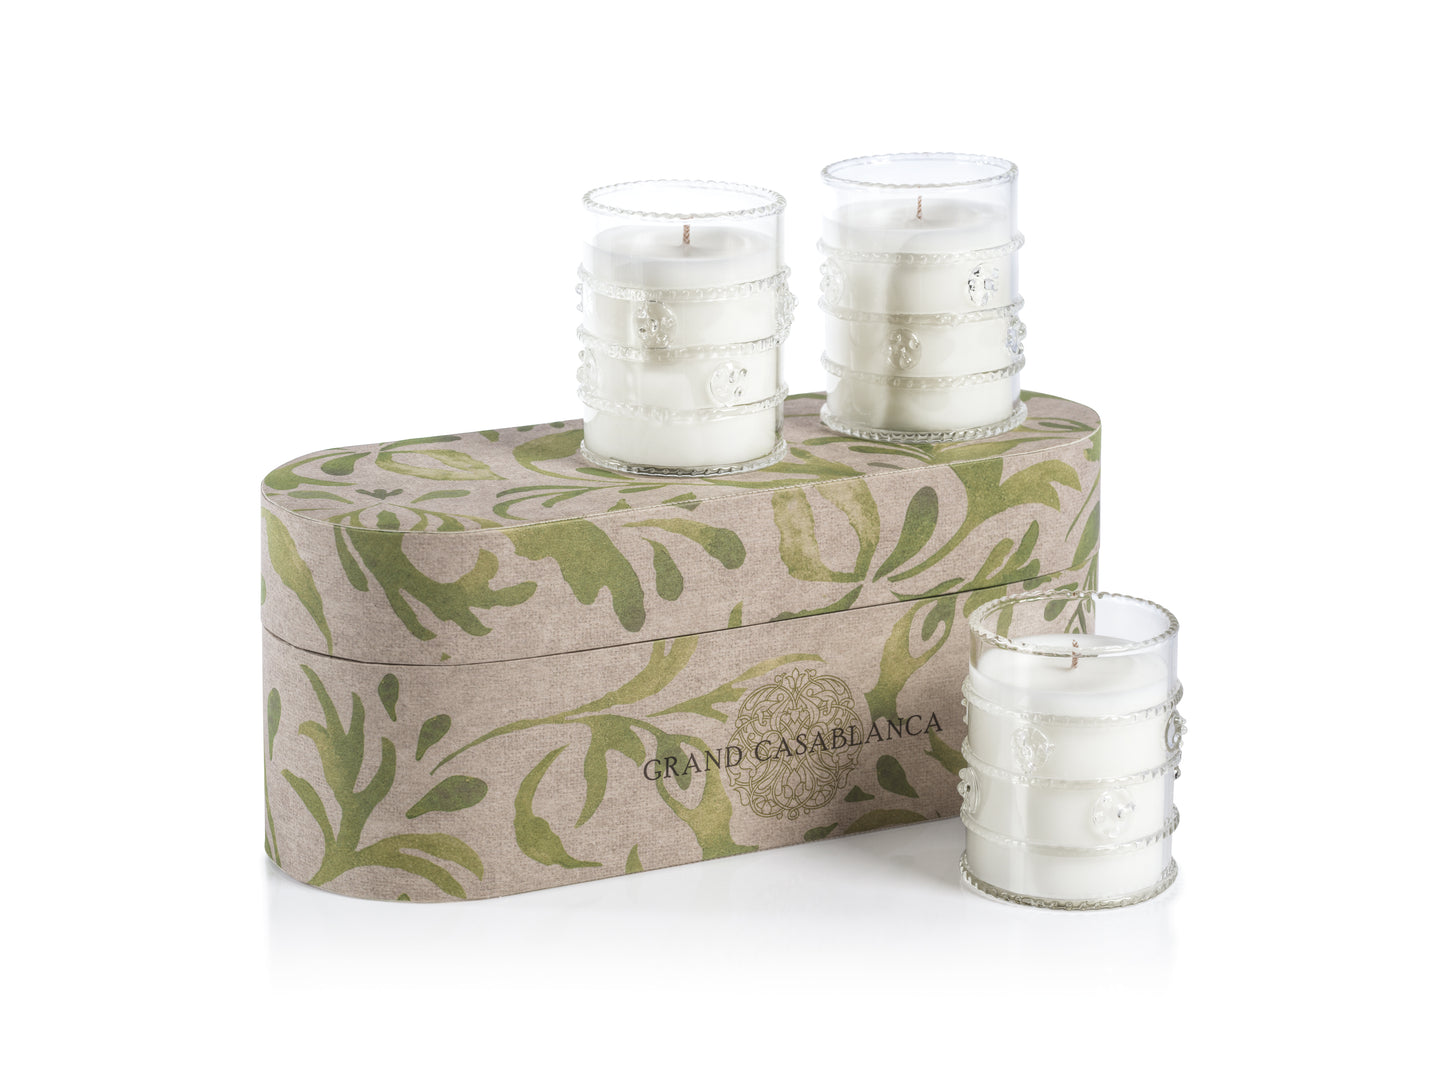 LILY of the VALLEY Zodax Grand Casablanca Scented Candle Trio - Gift Boxed